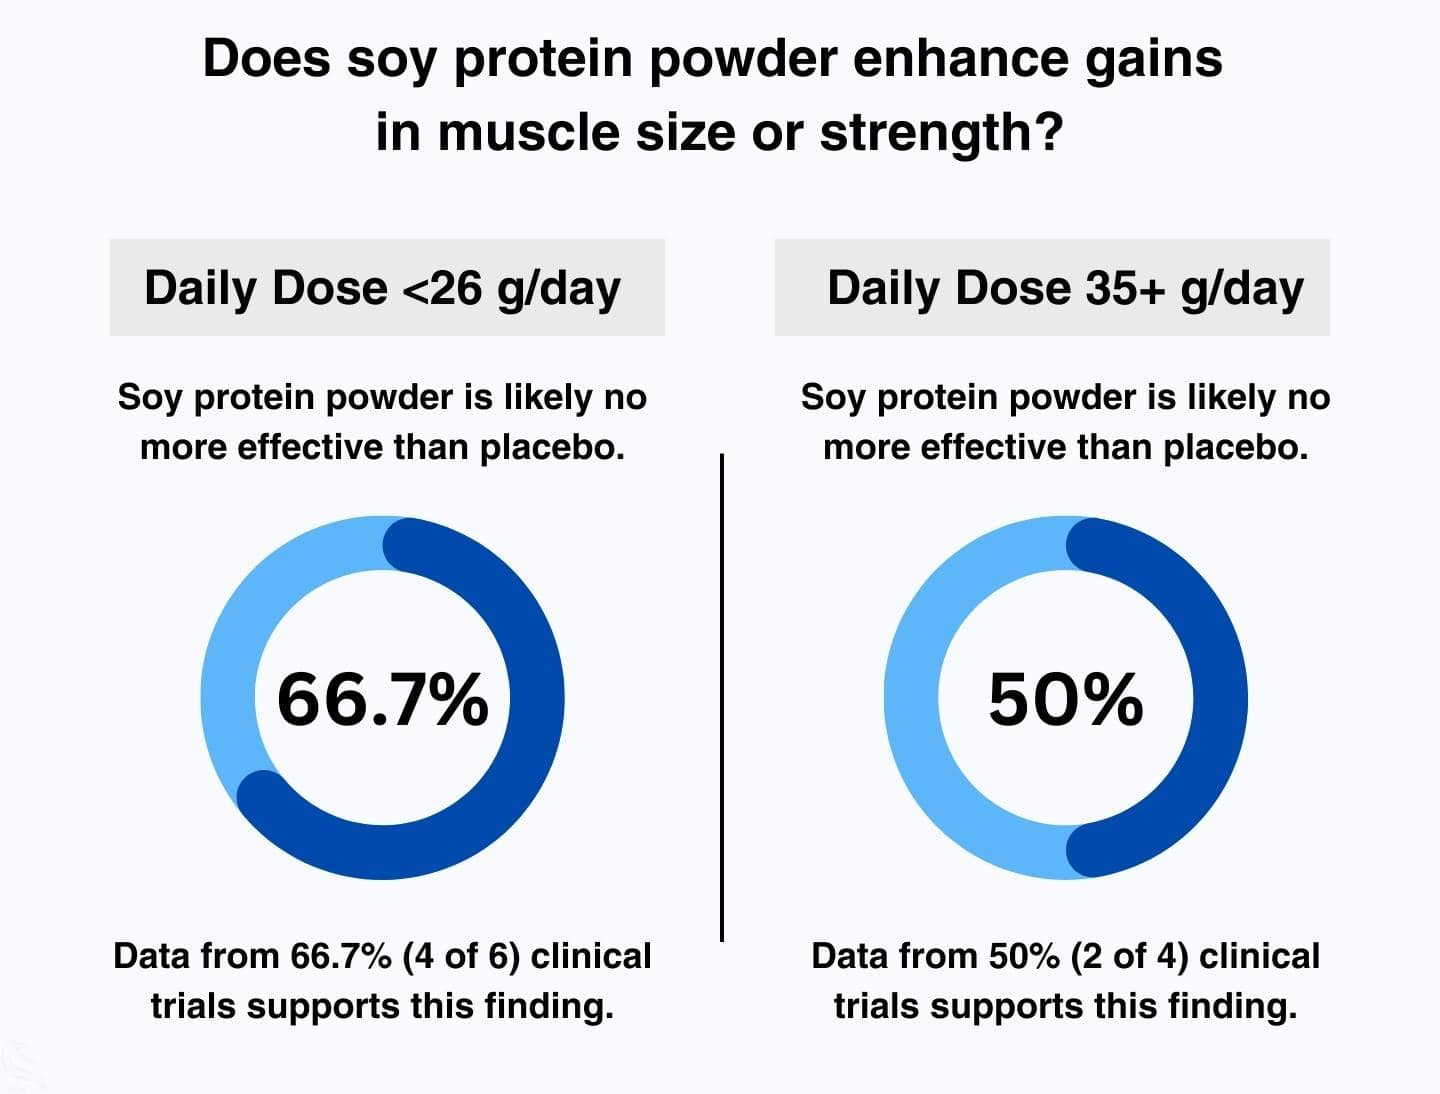 This image shows that the use of soy protein when bodybuilding, weighlifting, or another engaging in another resistance exercise is unlikely to be more effective than placebo or whey regardless of dose.